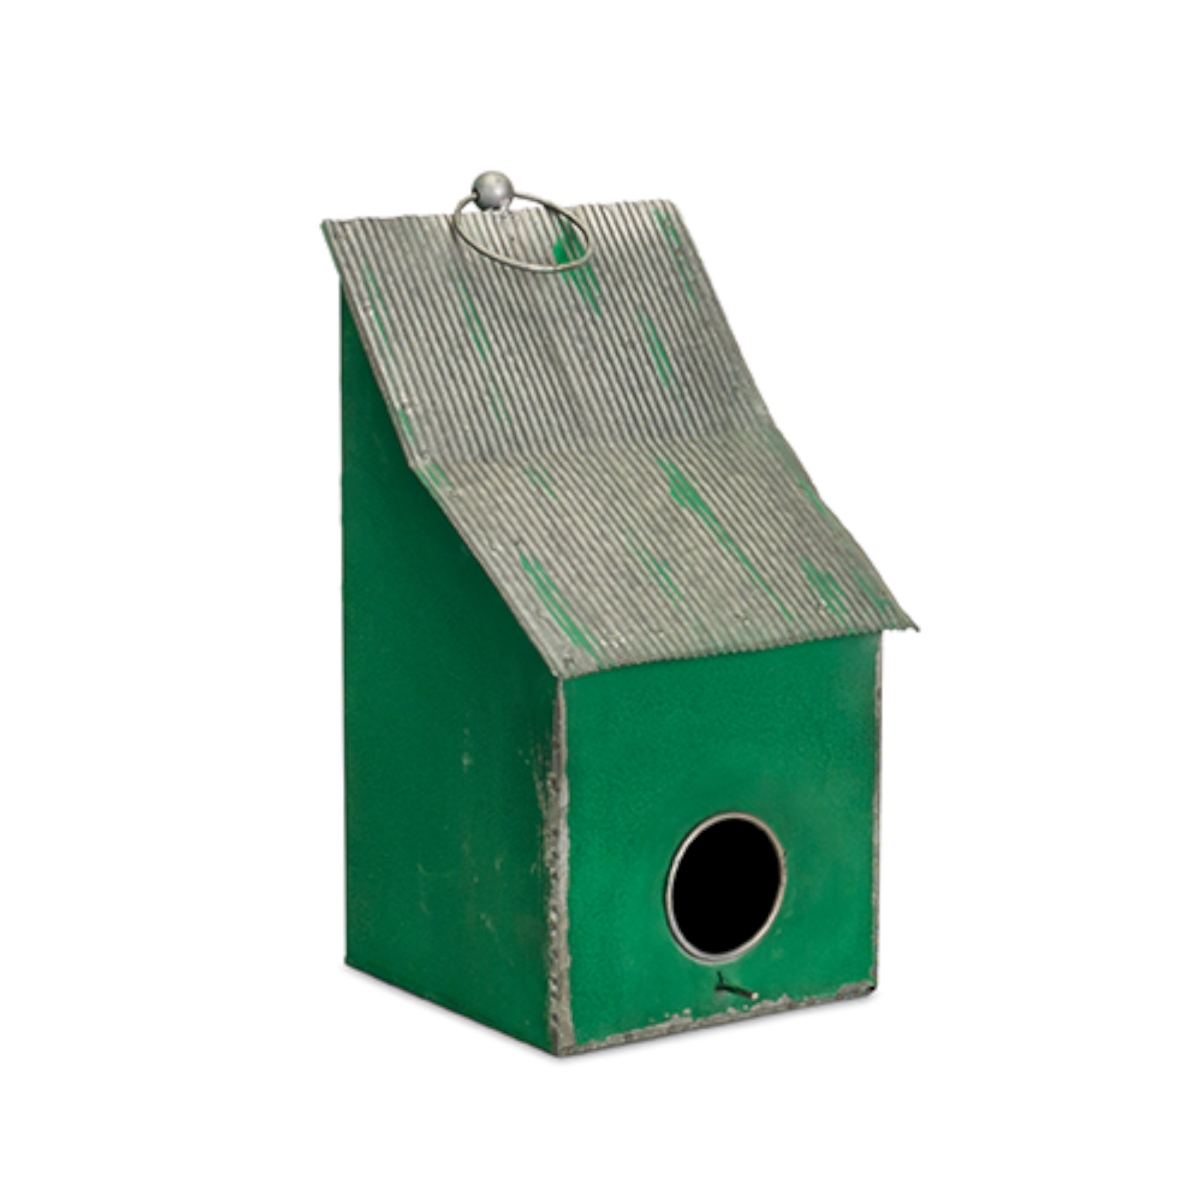 UPC 746427722353 product image for 72235DS 17 x 8.5 in. Metal Birdhouse, Green & Tin - Set of 2 | upcitemdb.com